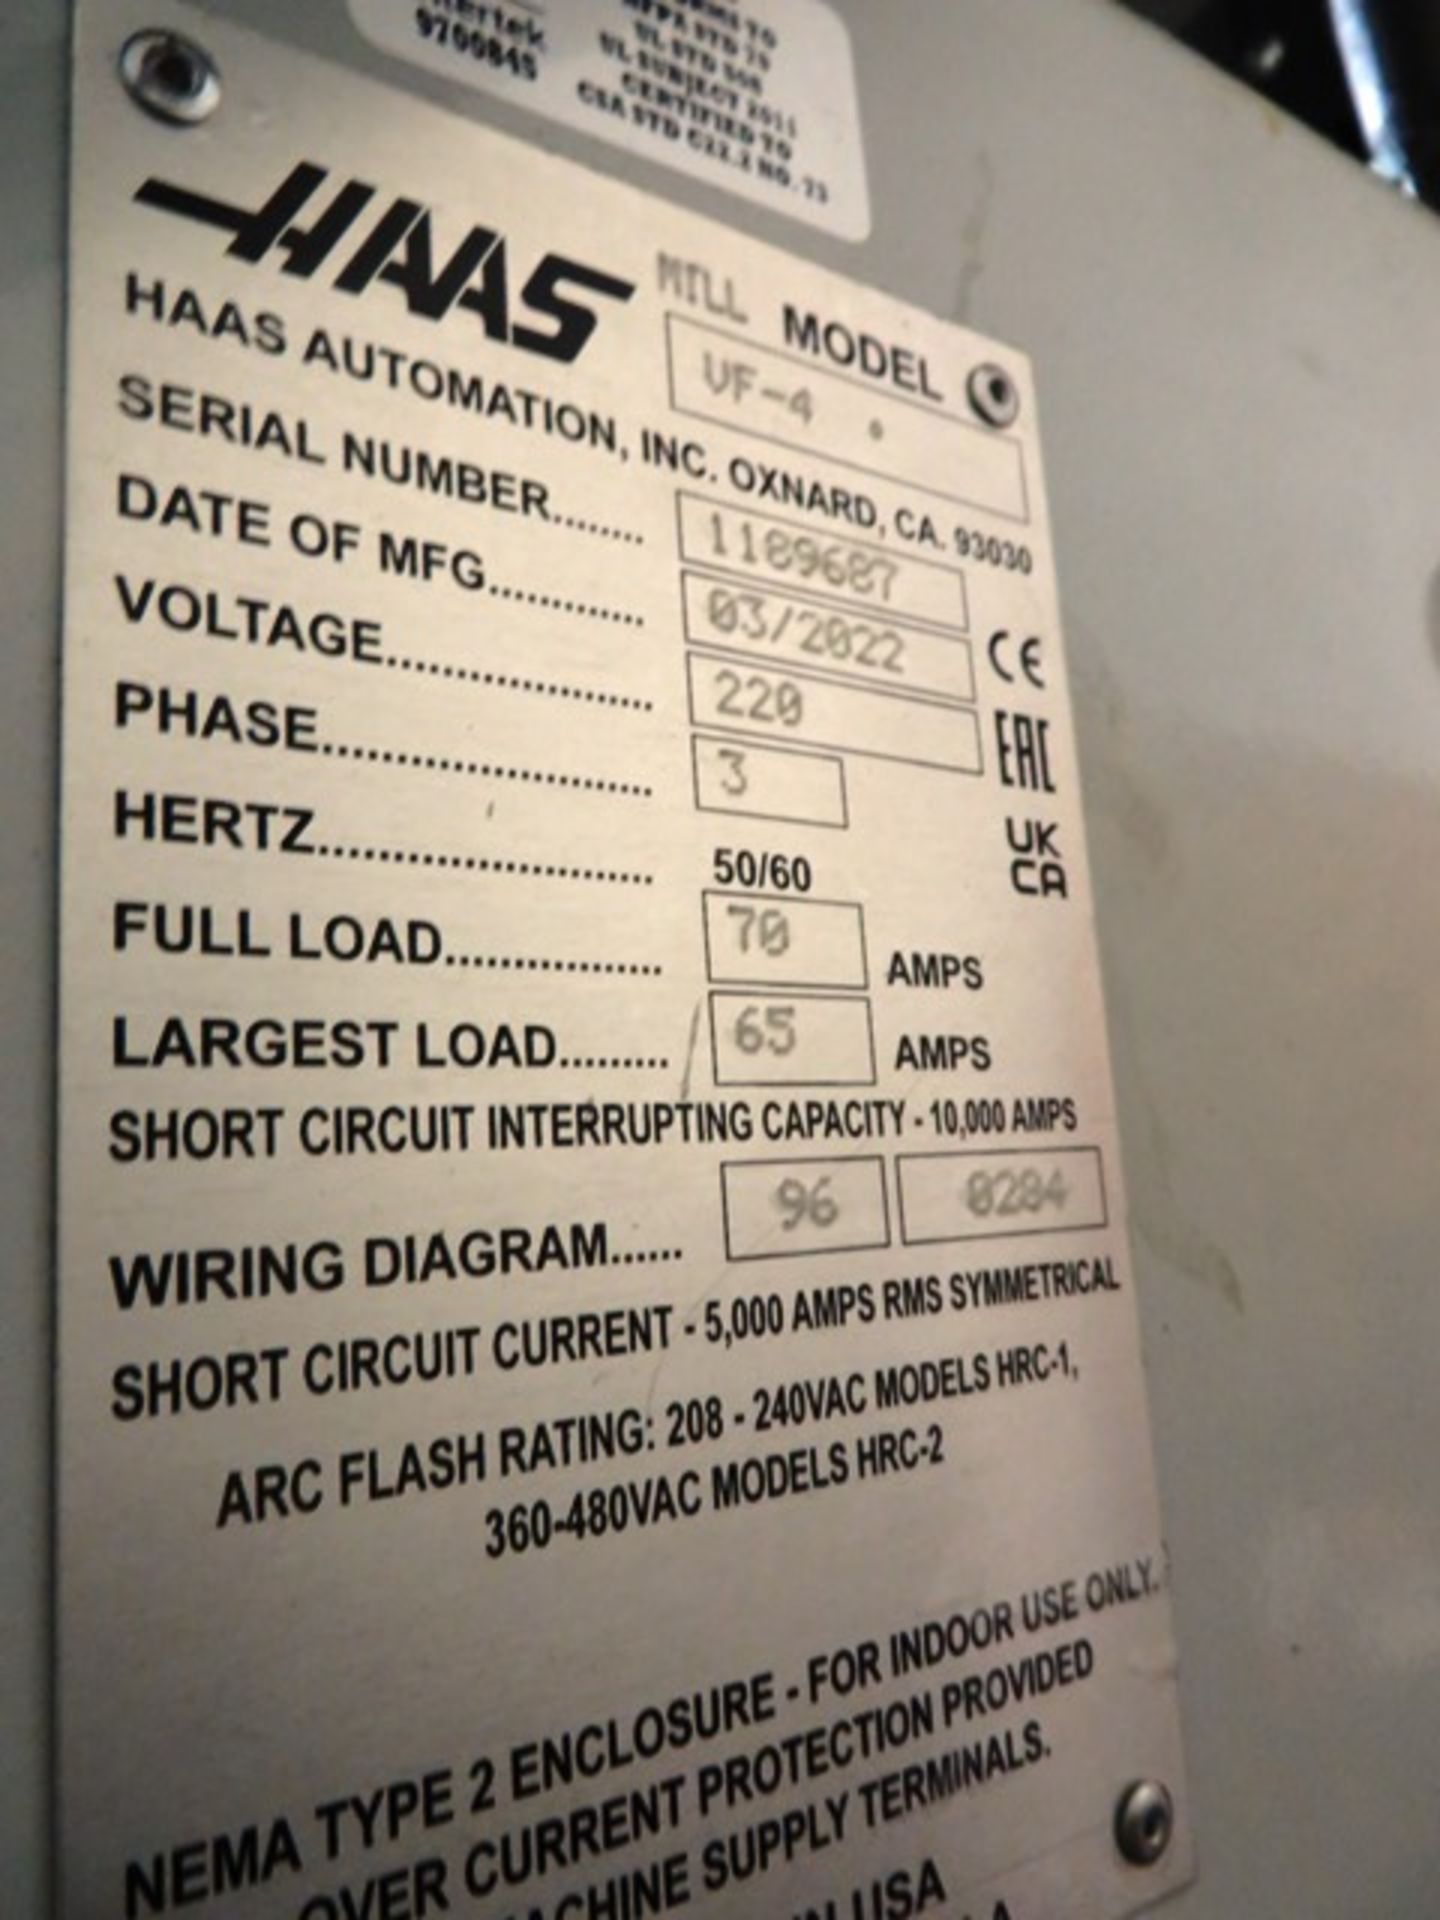 Haas VF-4 3-Axis CNC Vertical Machining Center - Image 7 of 7